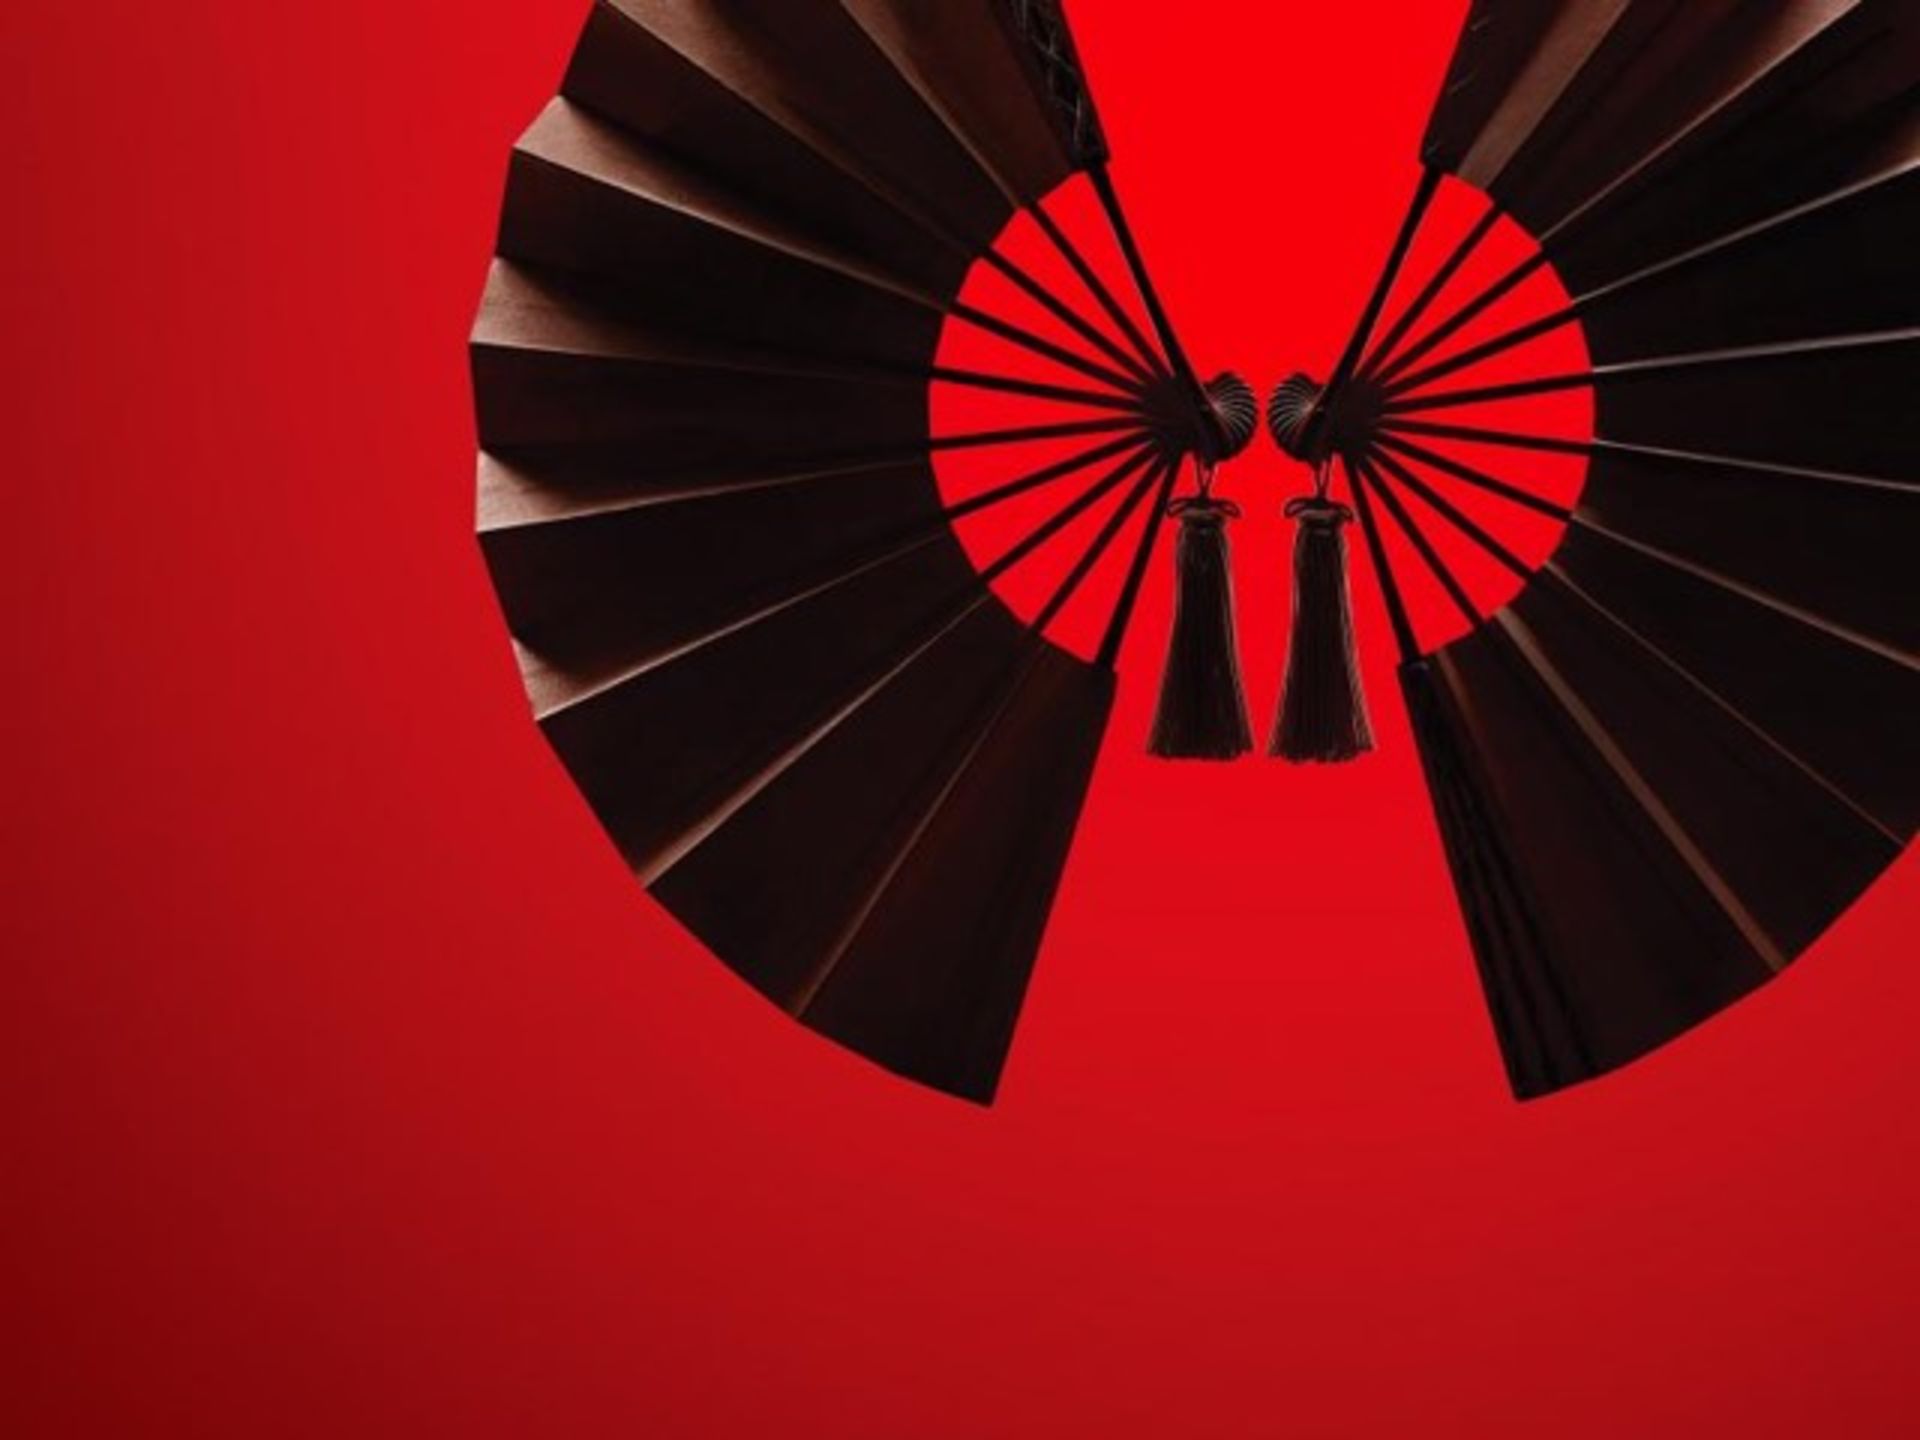 English National Opera, Madam Butterfly Opening Night VIP experience for 4 guests - 16th May 2016